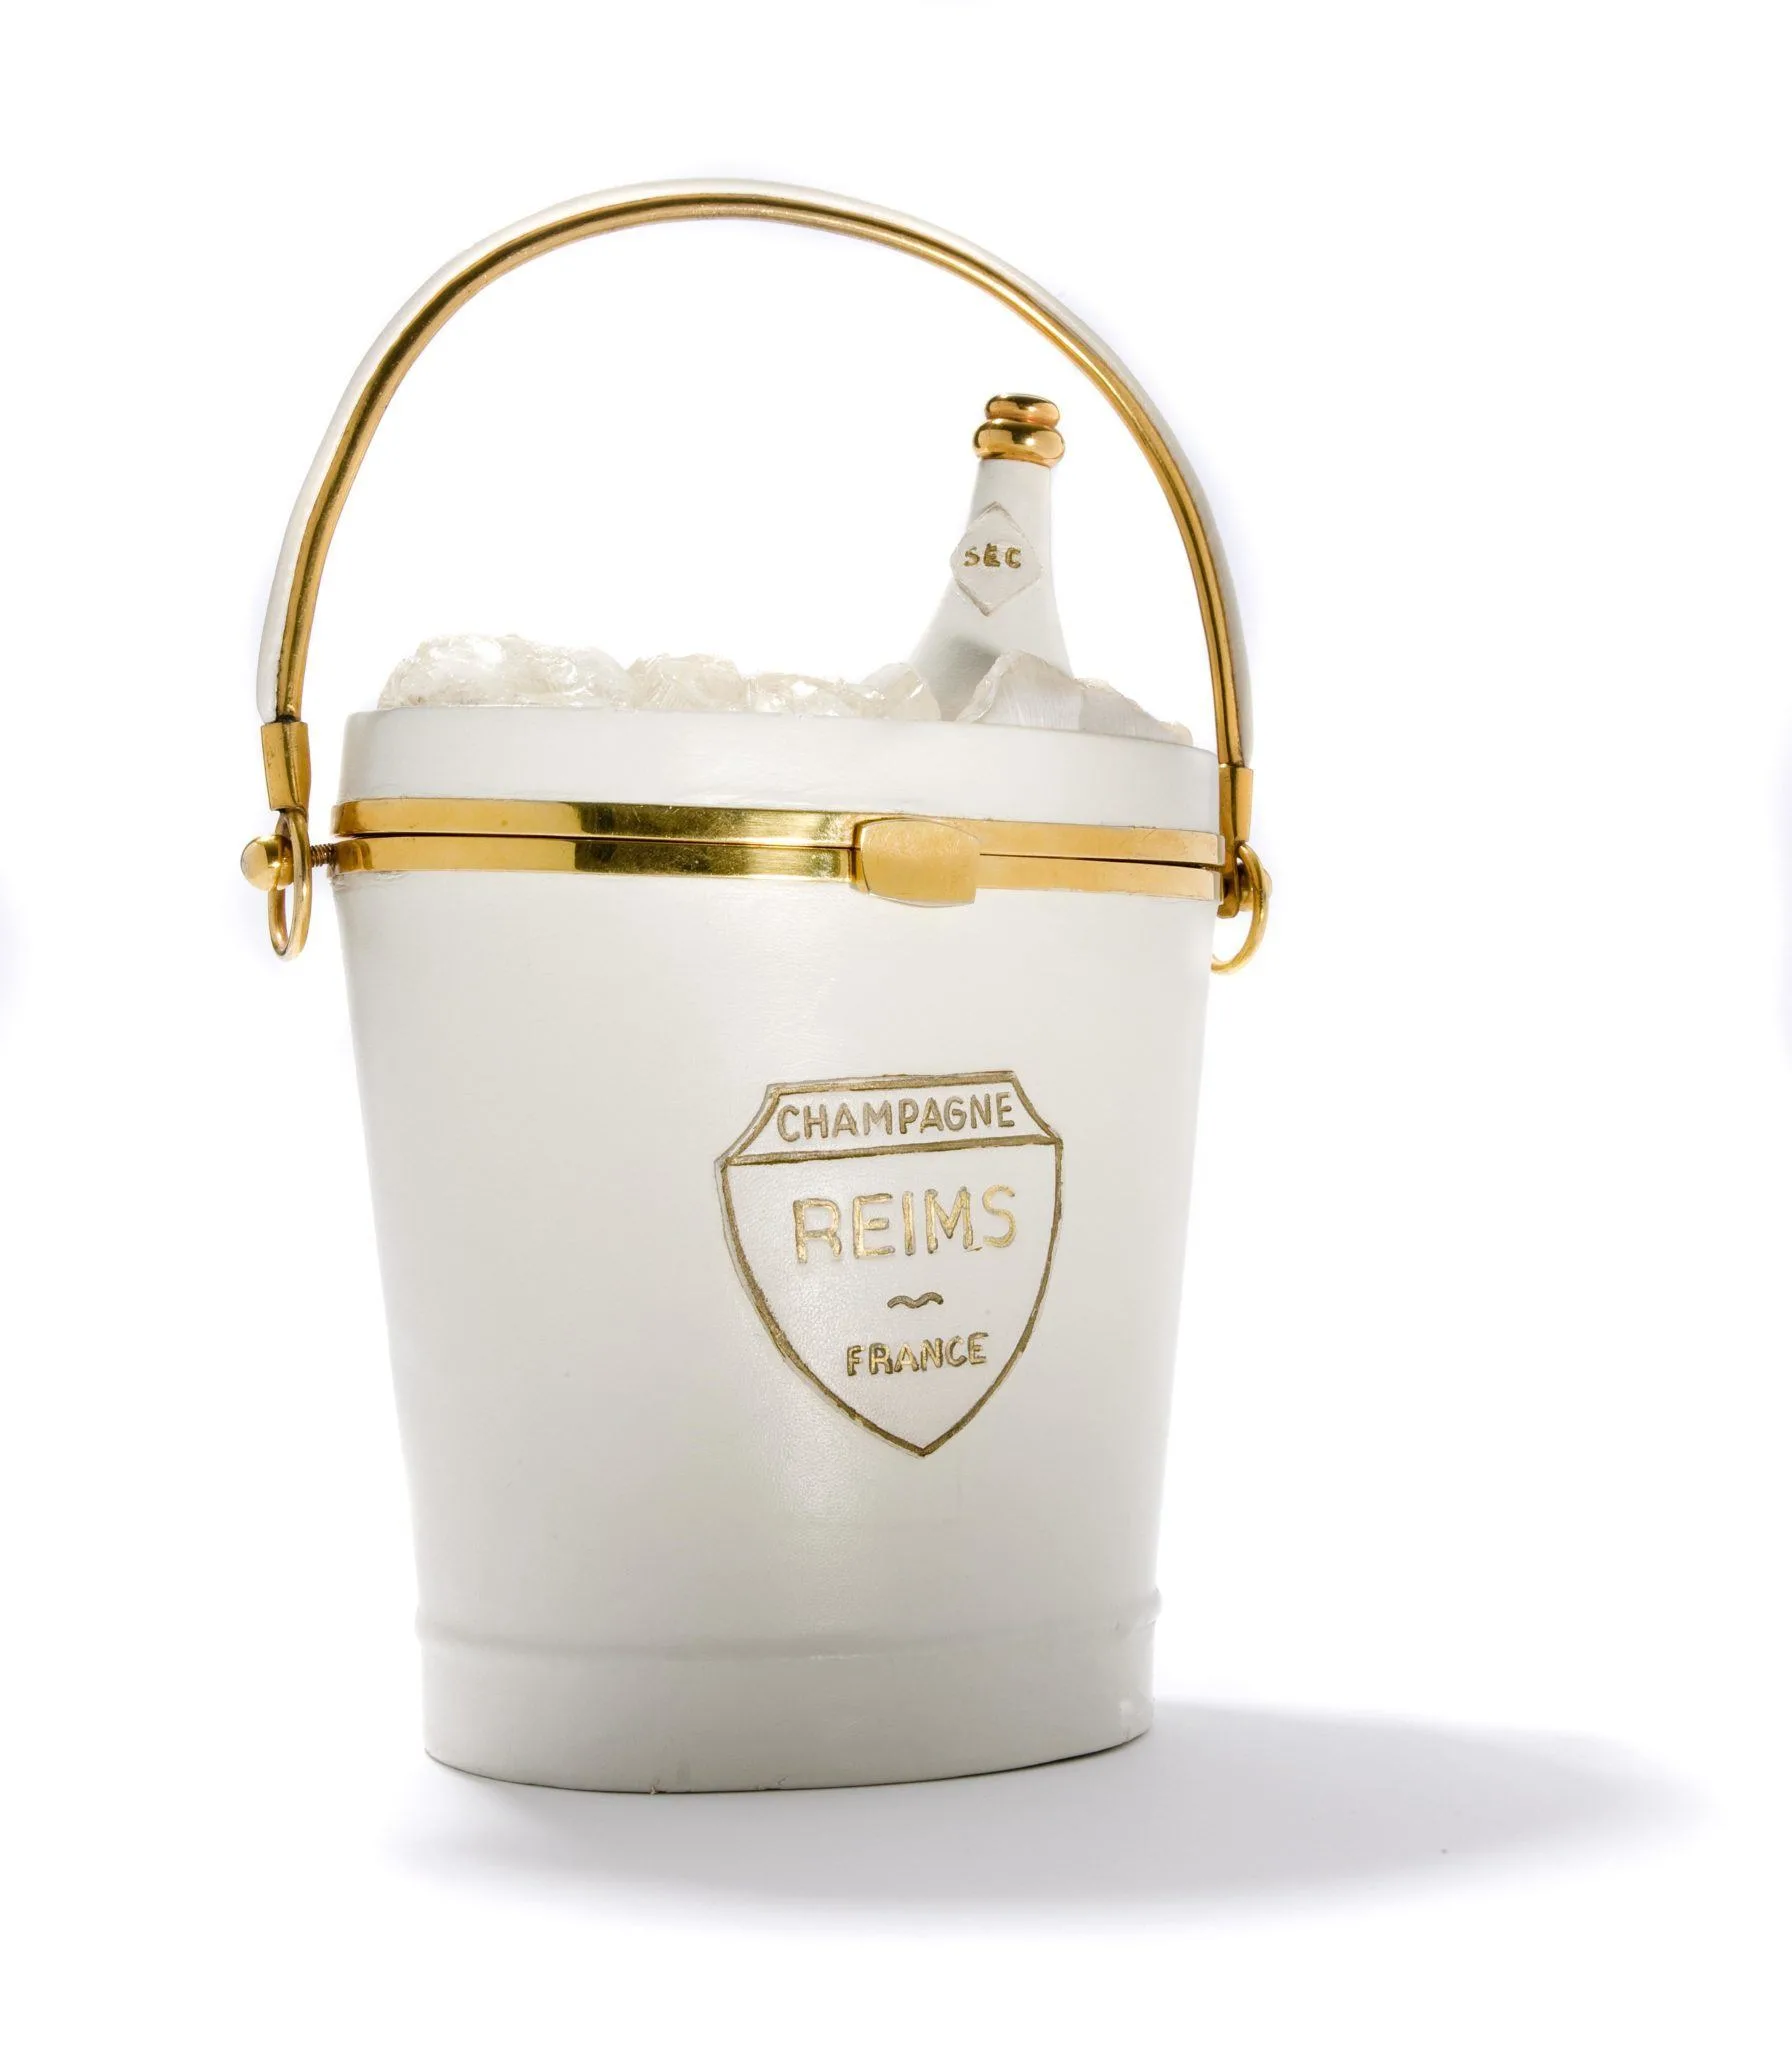 Champagne bucket handbag on display at Amsterdam's Museum of Bags and Purses